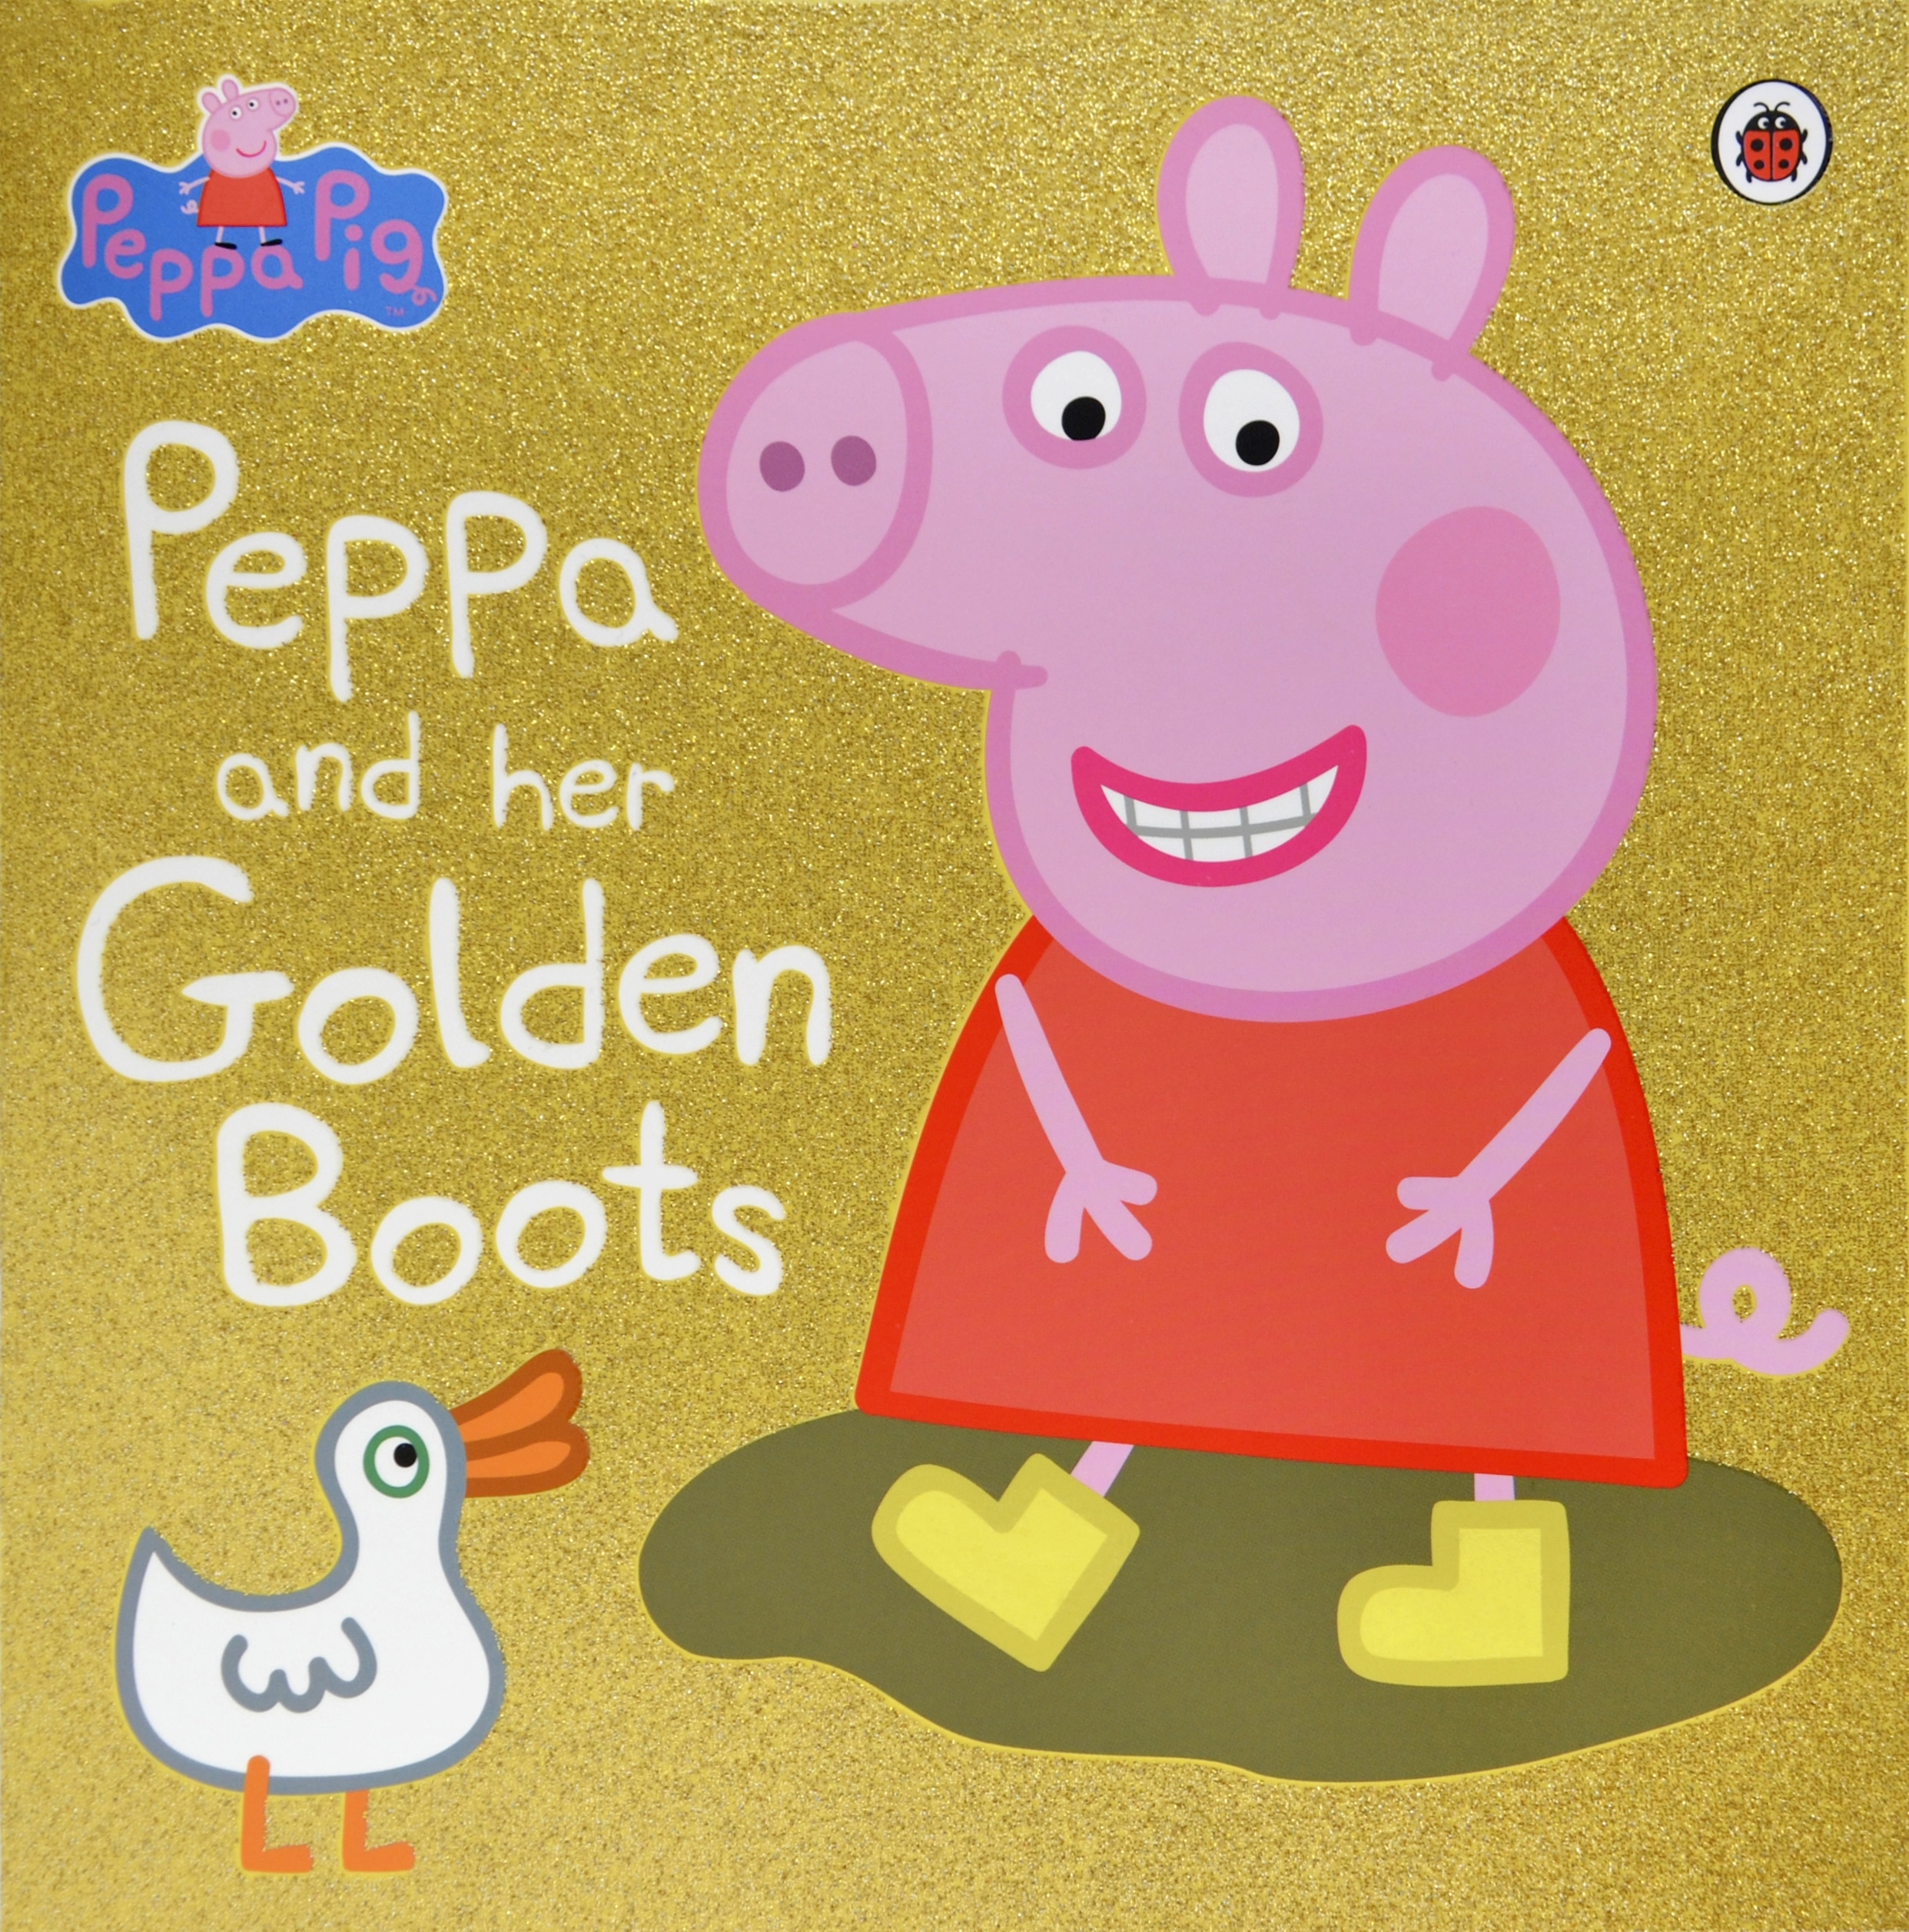 Book “Peppa Pig: Peppa and Her Golden Boots” by Peppa Pig — March 3, 2016